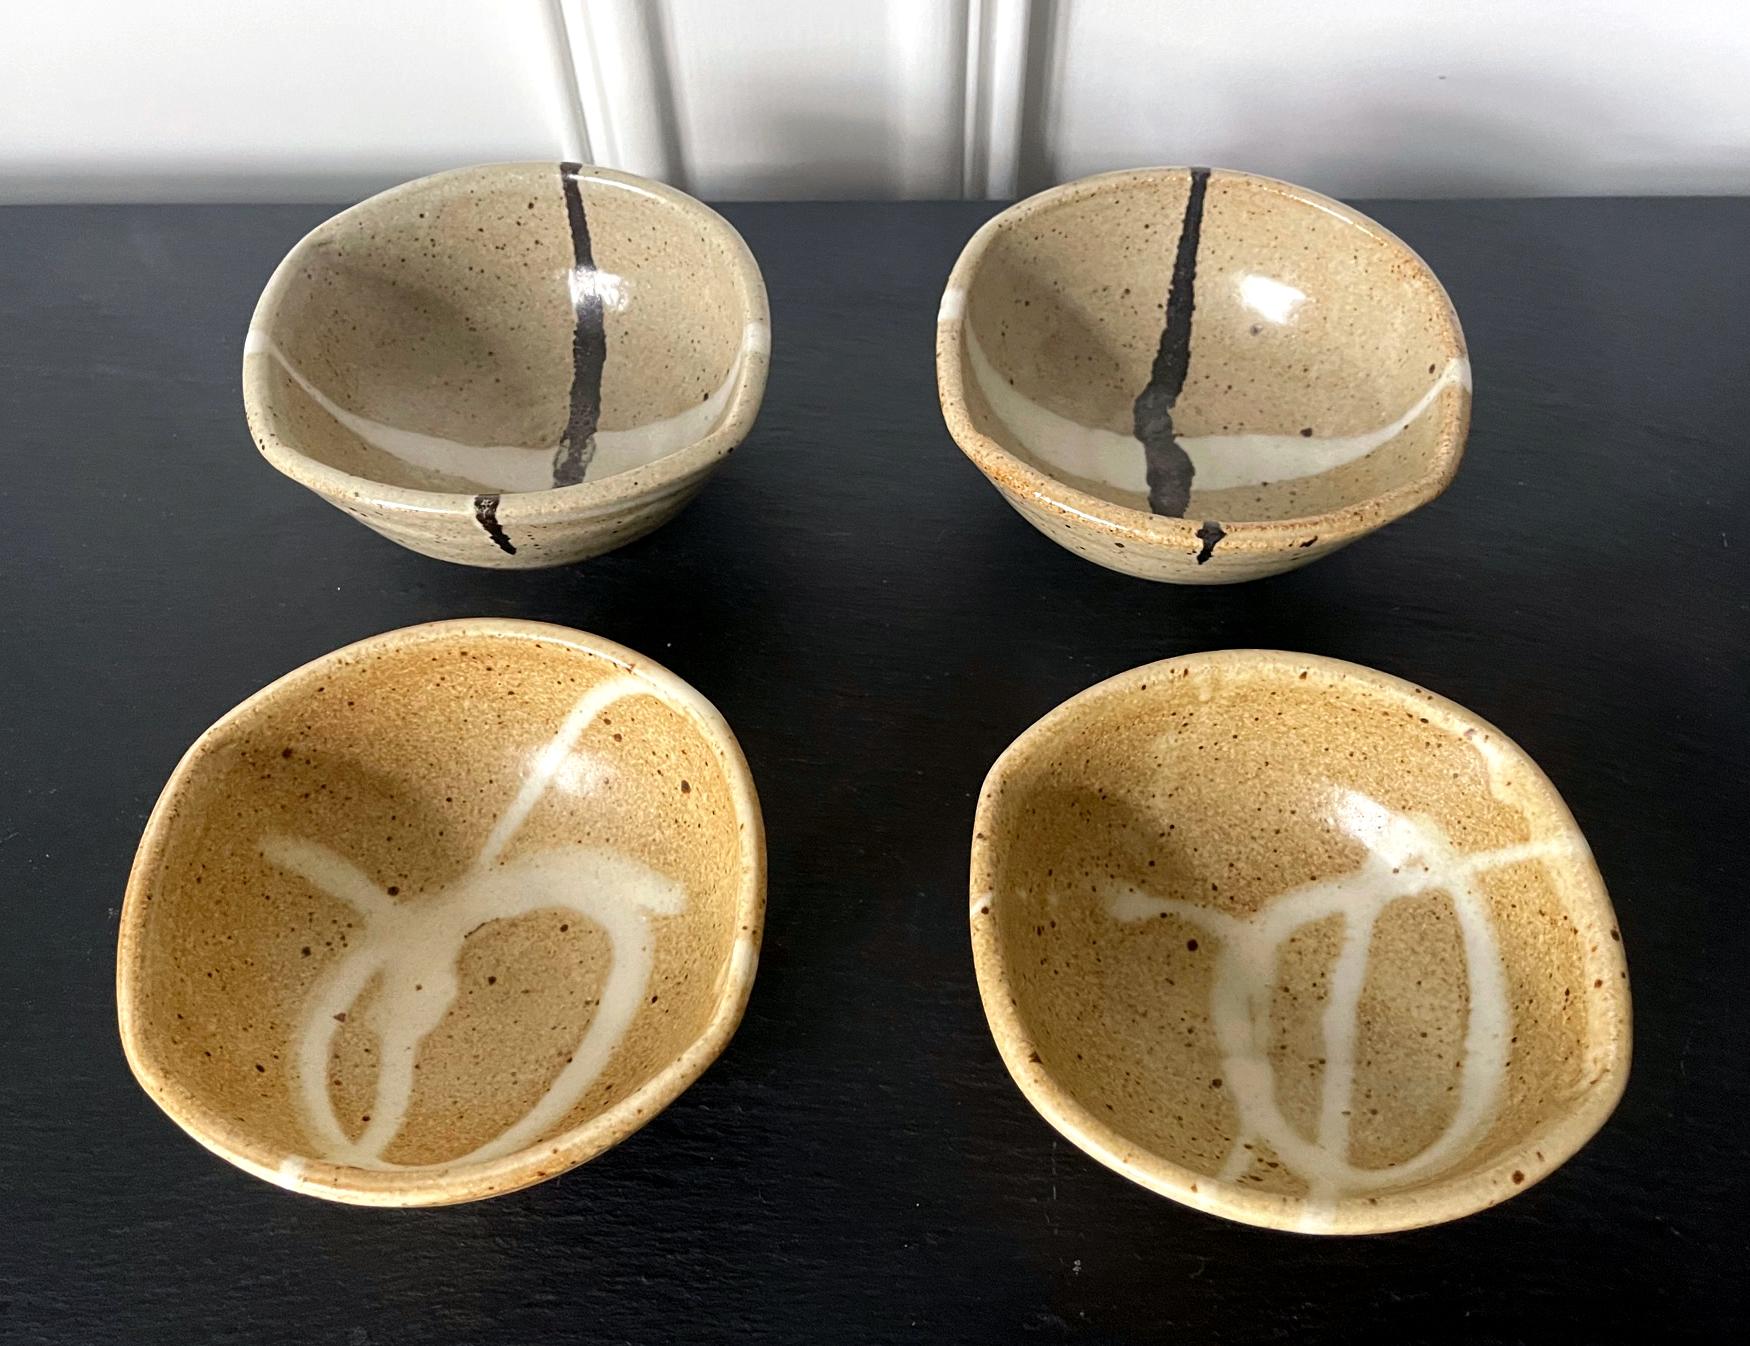 A set of four stoneware tea bowl by American ceramist Warren Mackenzie (1924-2018). The bowls were potted free-handed with slightly irregular circular shape. Presented as two pairs, the surface of the bowls was covered in a glossy beige color glaze